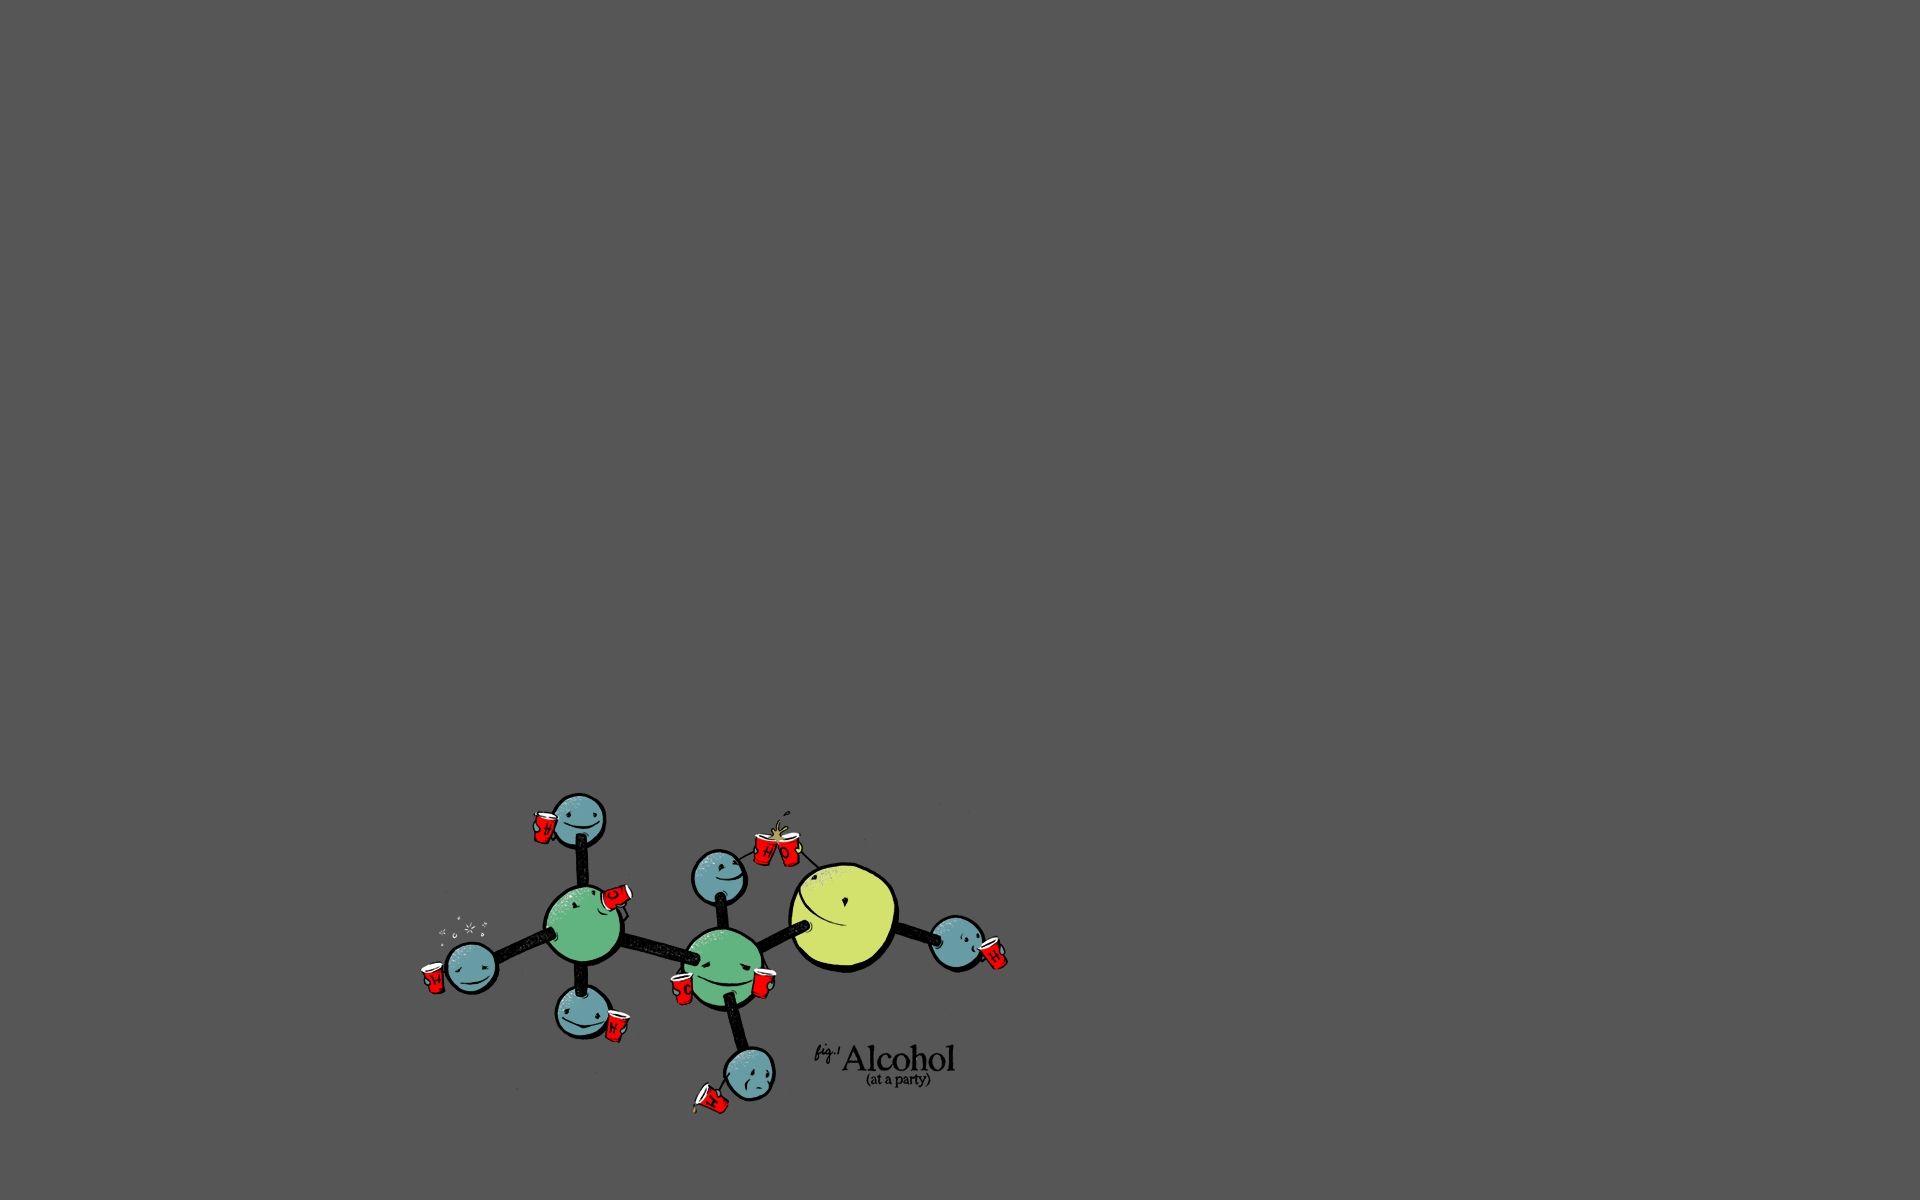 Chemical structure of alcohol on a gray background - Chemistry